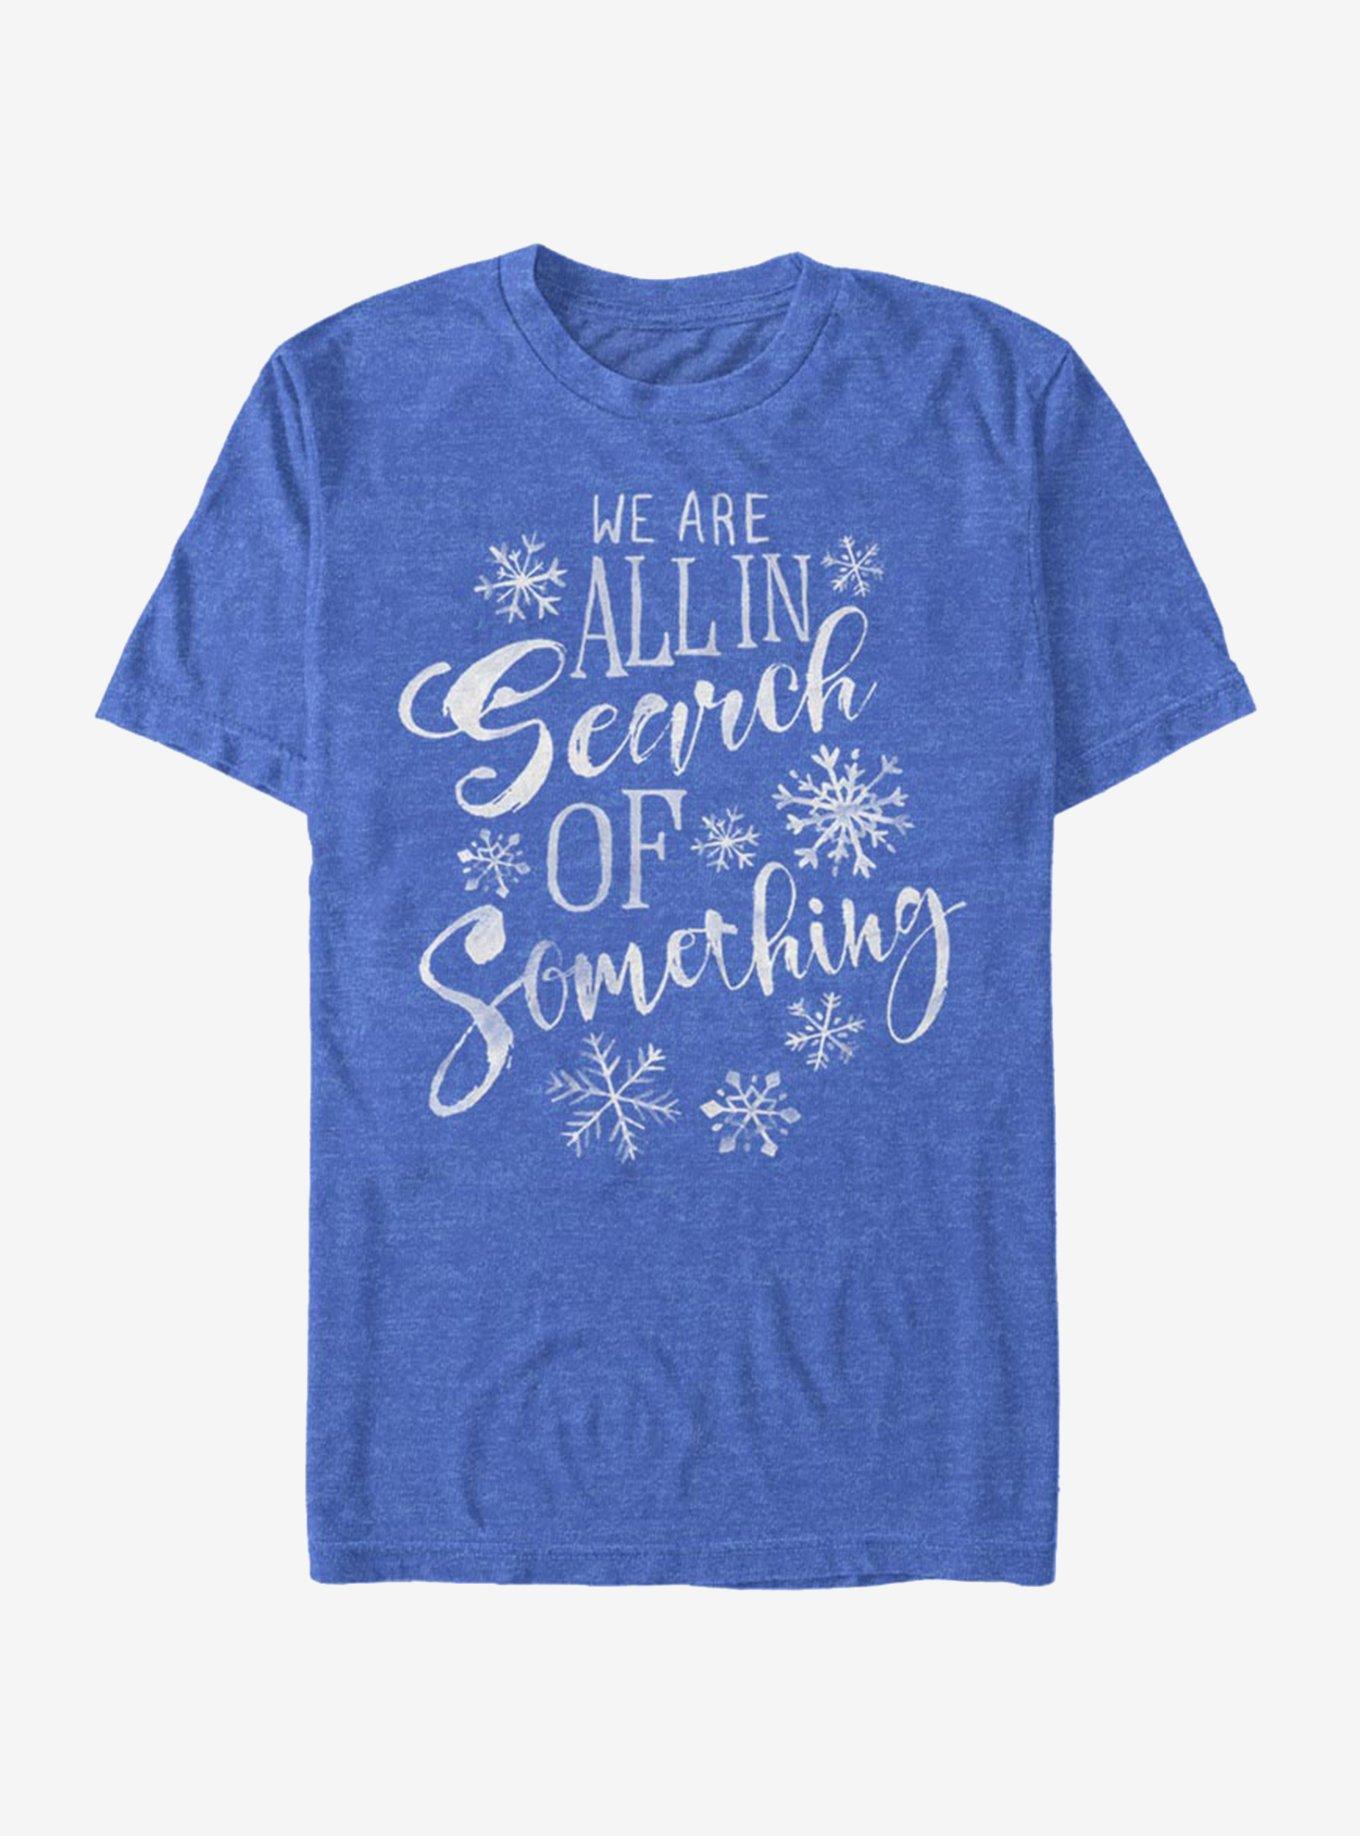 Disney Frozen 2 In Search Of Something T-Shirt, ROY HTR, hi-res